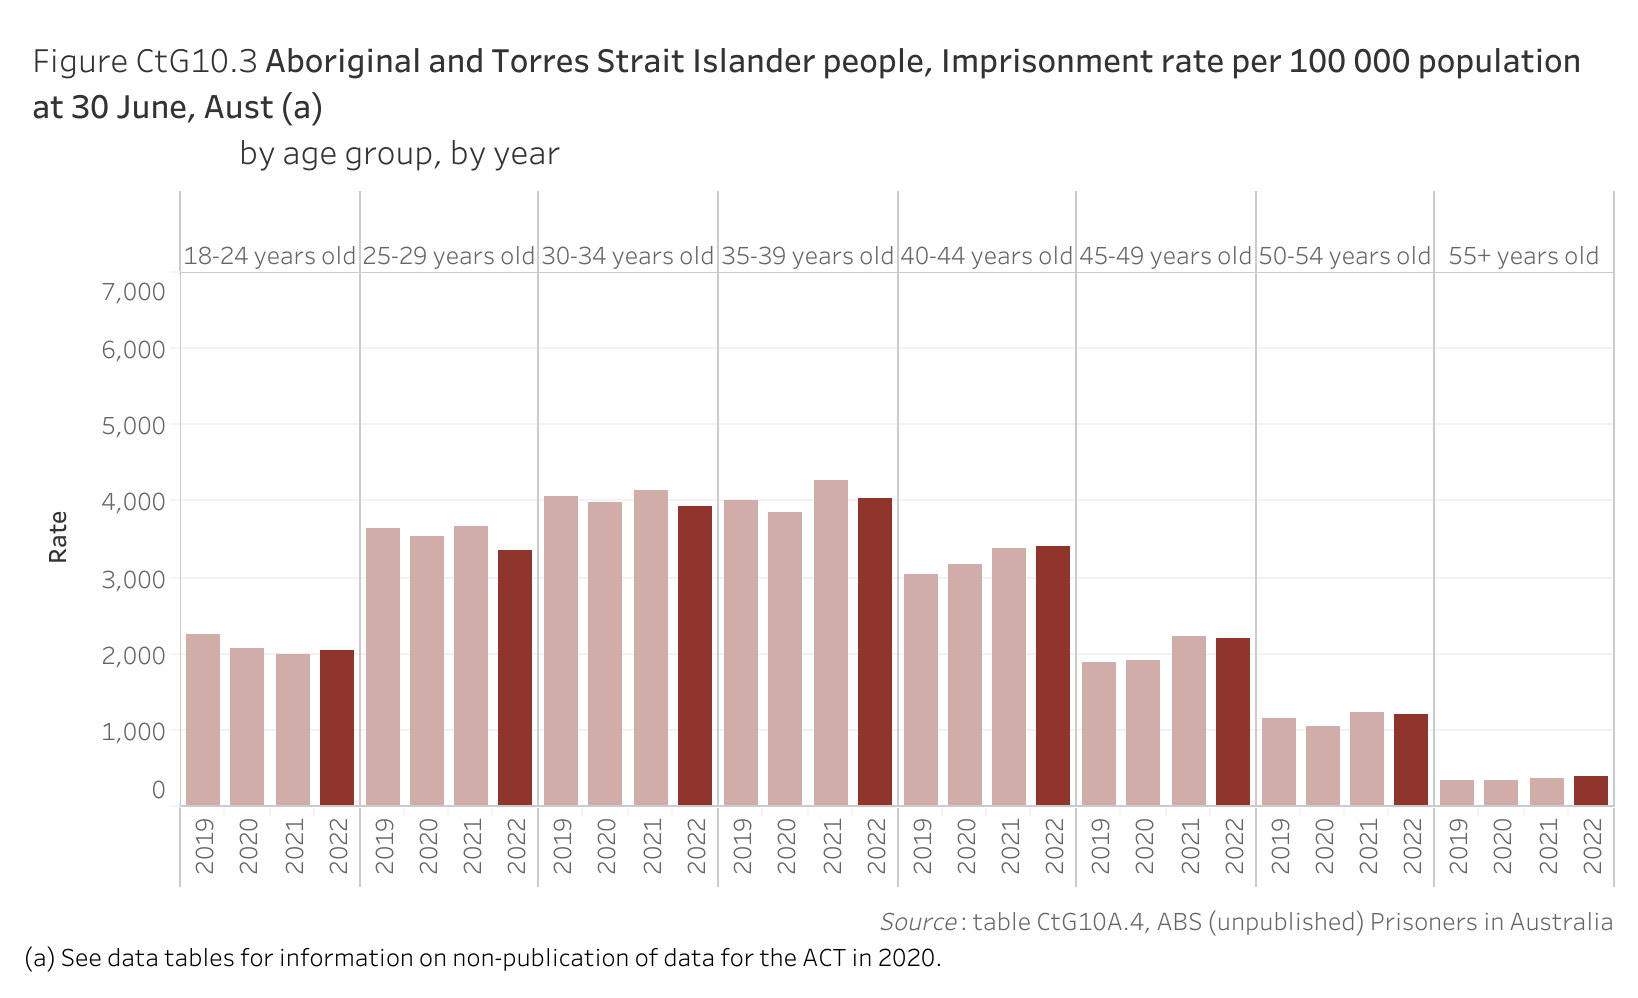 Figure CtG10.3 shows Aboriginal and Torres Strait Islander people, Imprisonment rate per 100 000 population at 30 June, Australia, by age group, by year. More details can be found within the text near this image.